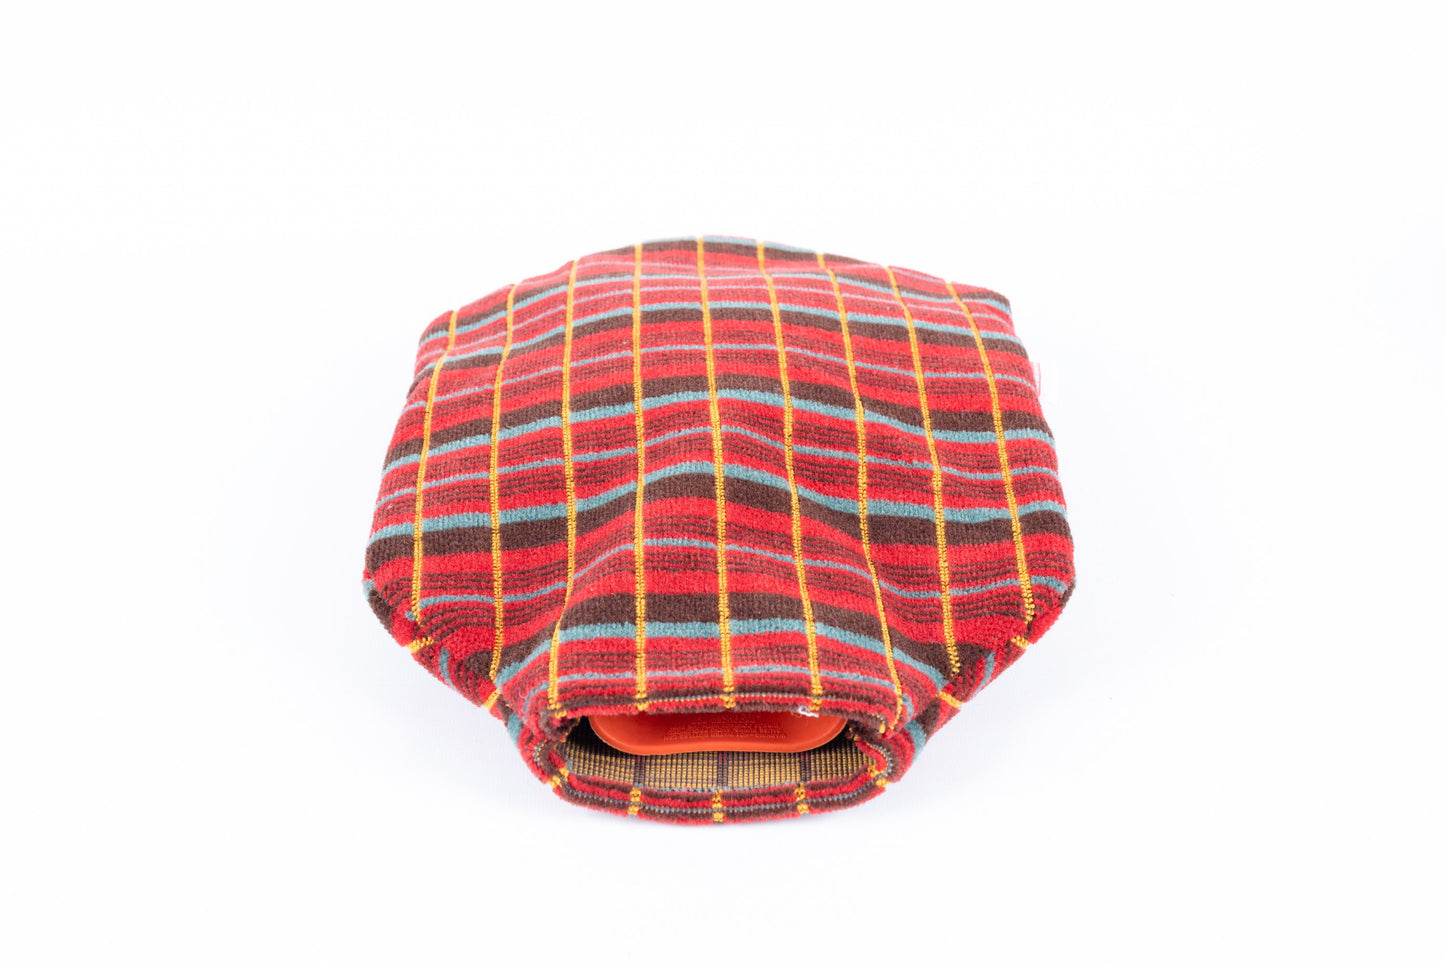 London Transport Routemaster (RM) Bus Moquette Hot Water Bottle Cover